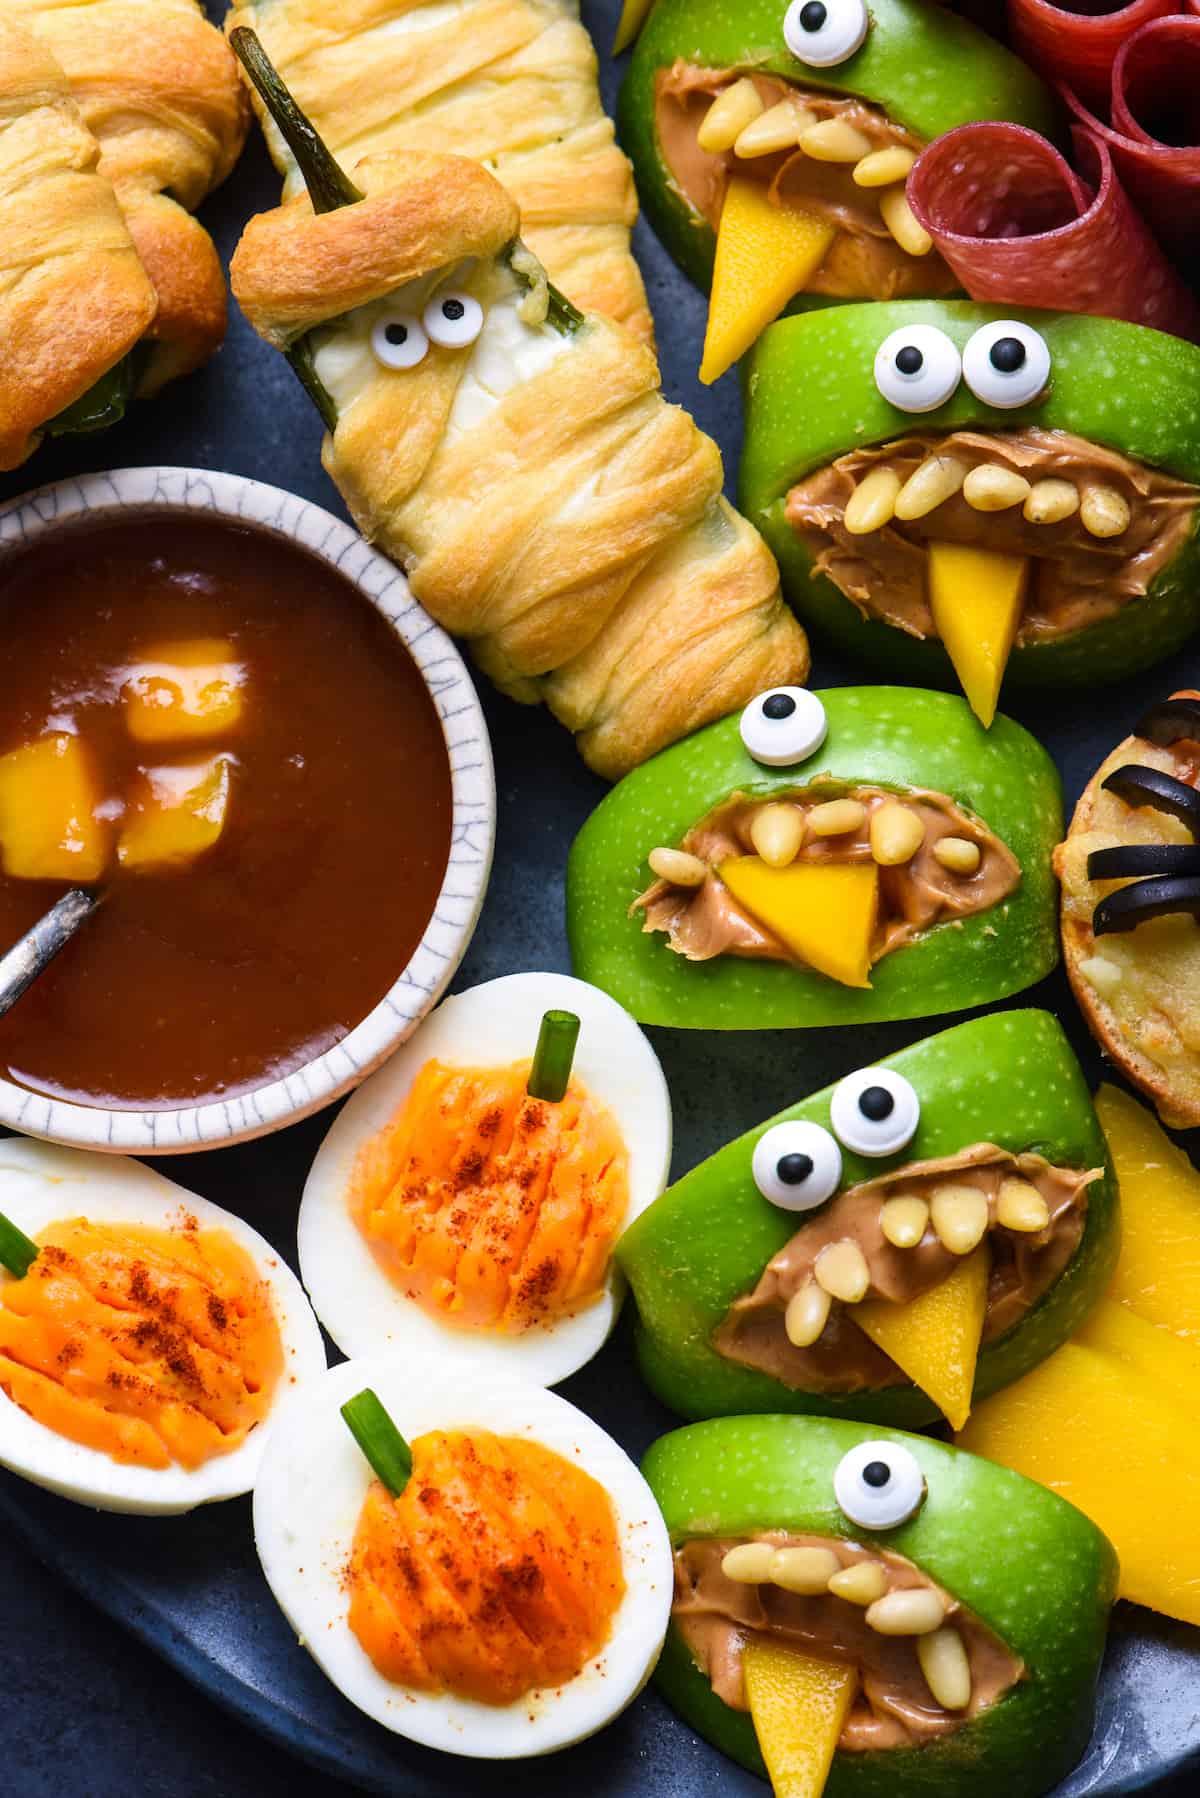 Closeup of Halloween themed food, like deviled eggs that look like pumpkins, jalapeno poppers wrapped like mummies and green apples cut out like monsters.